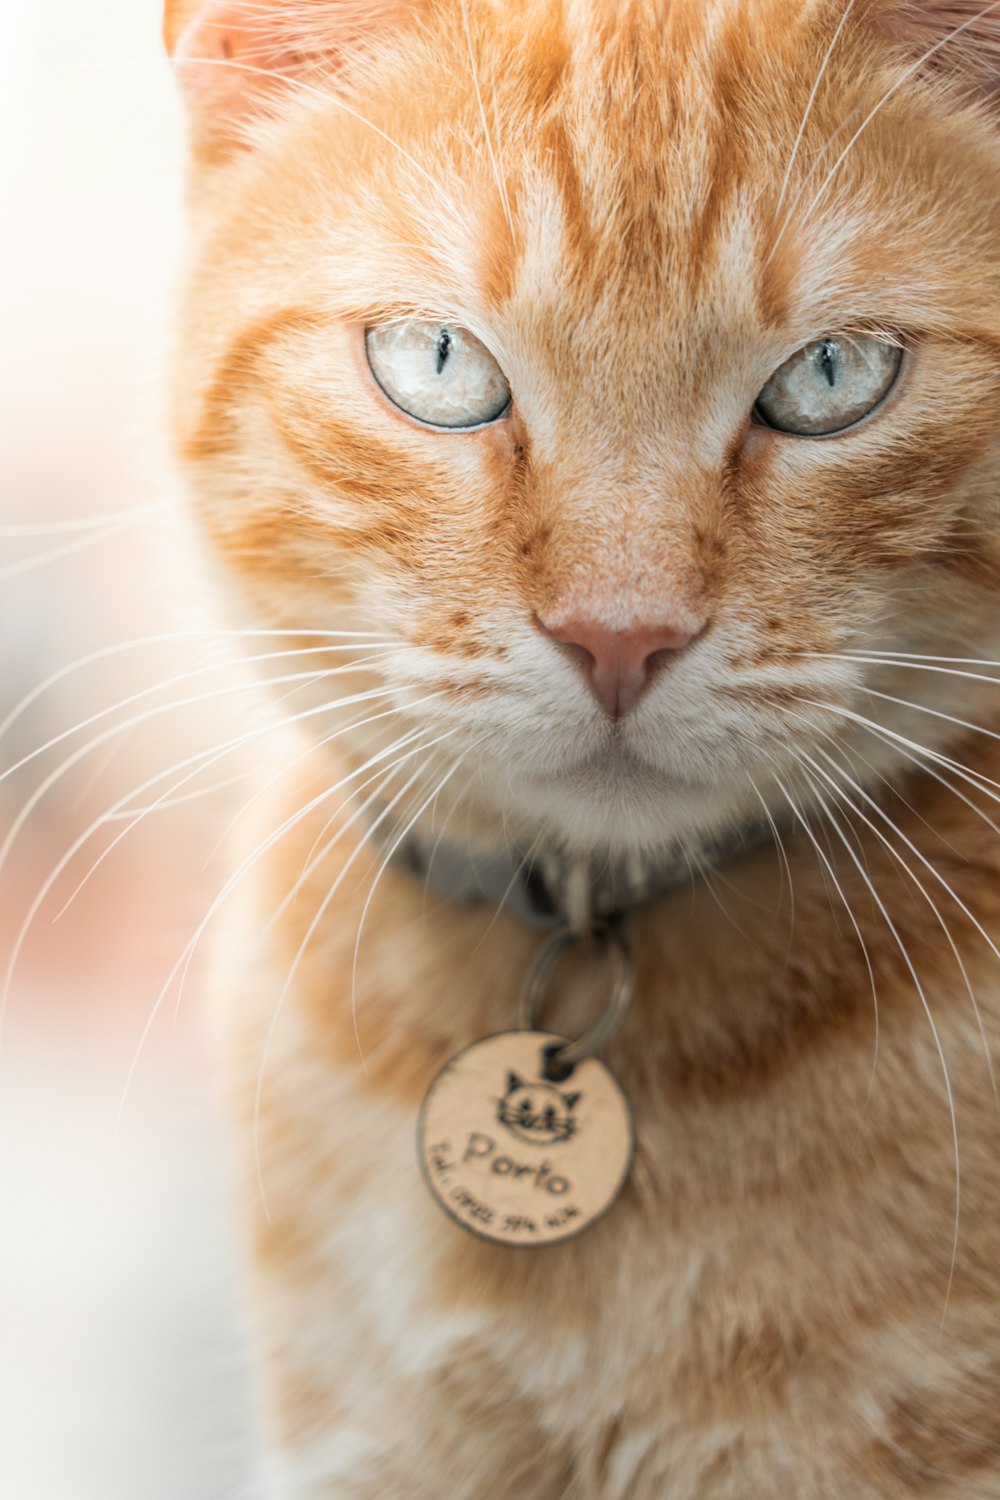 a close up of a cat with a tag on it's collar